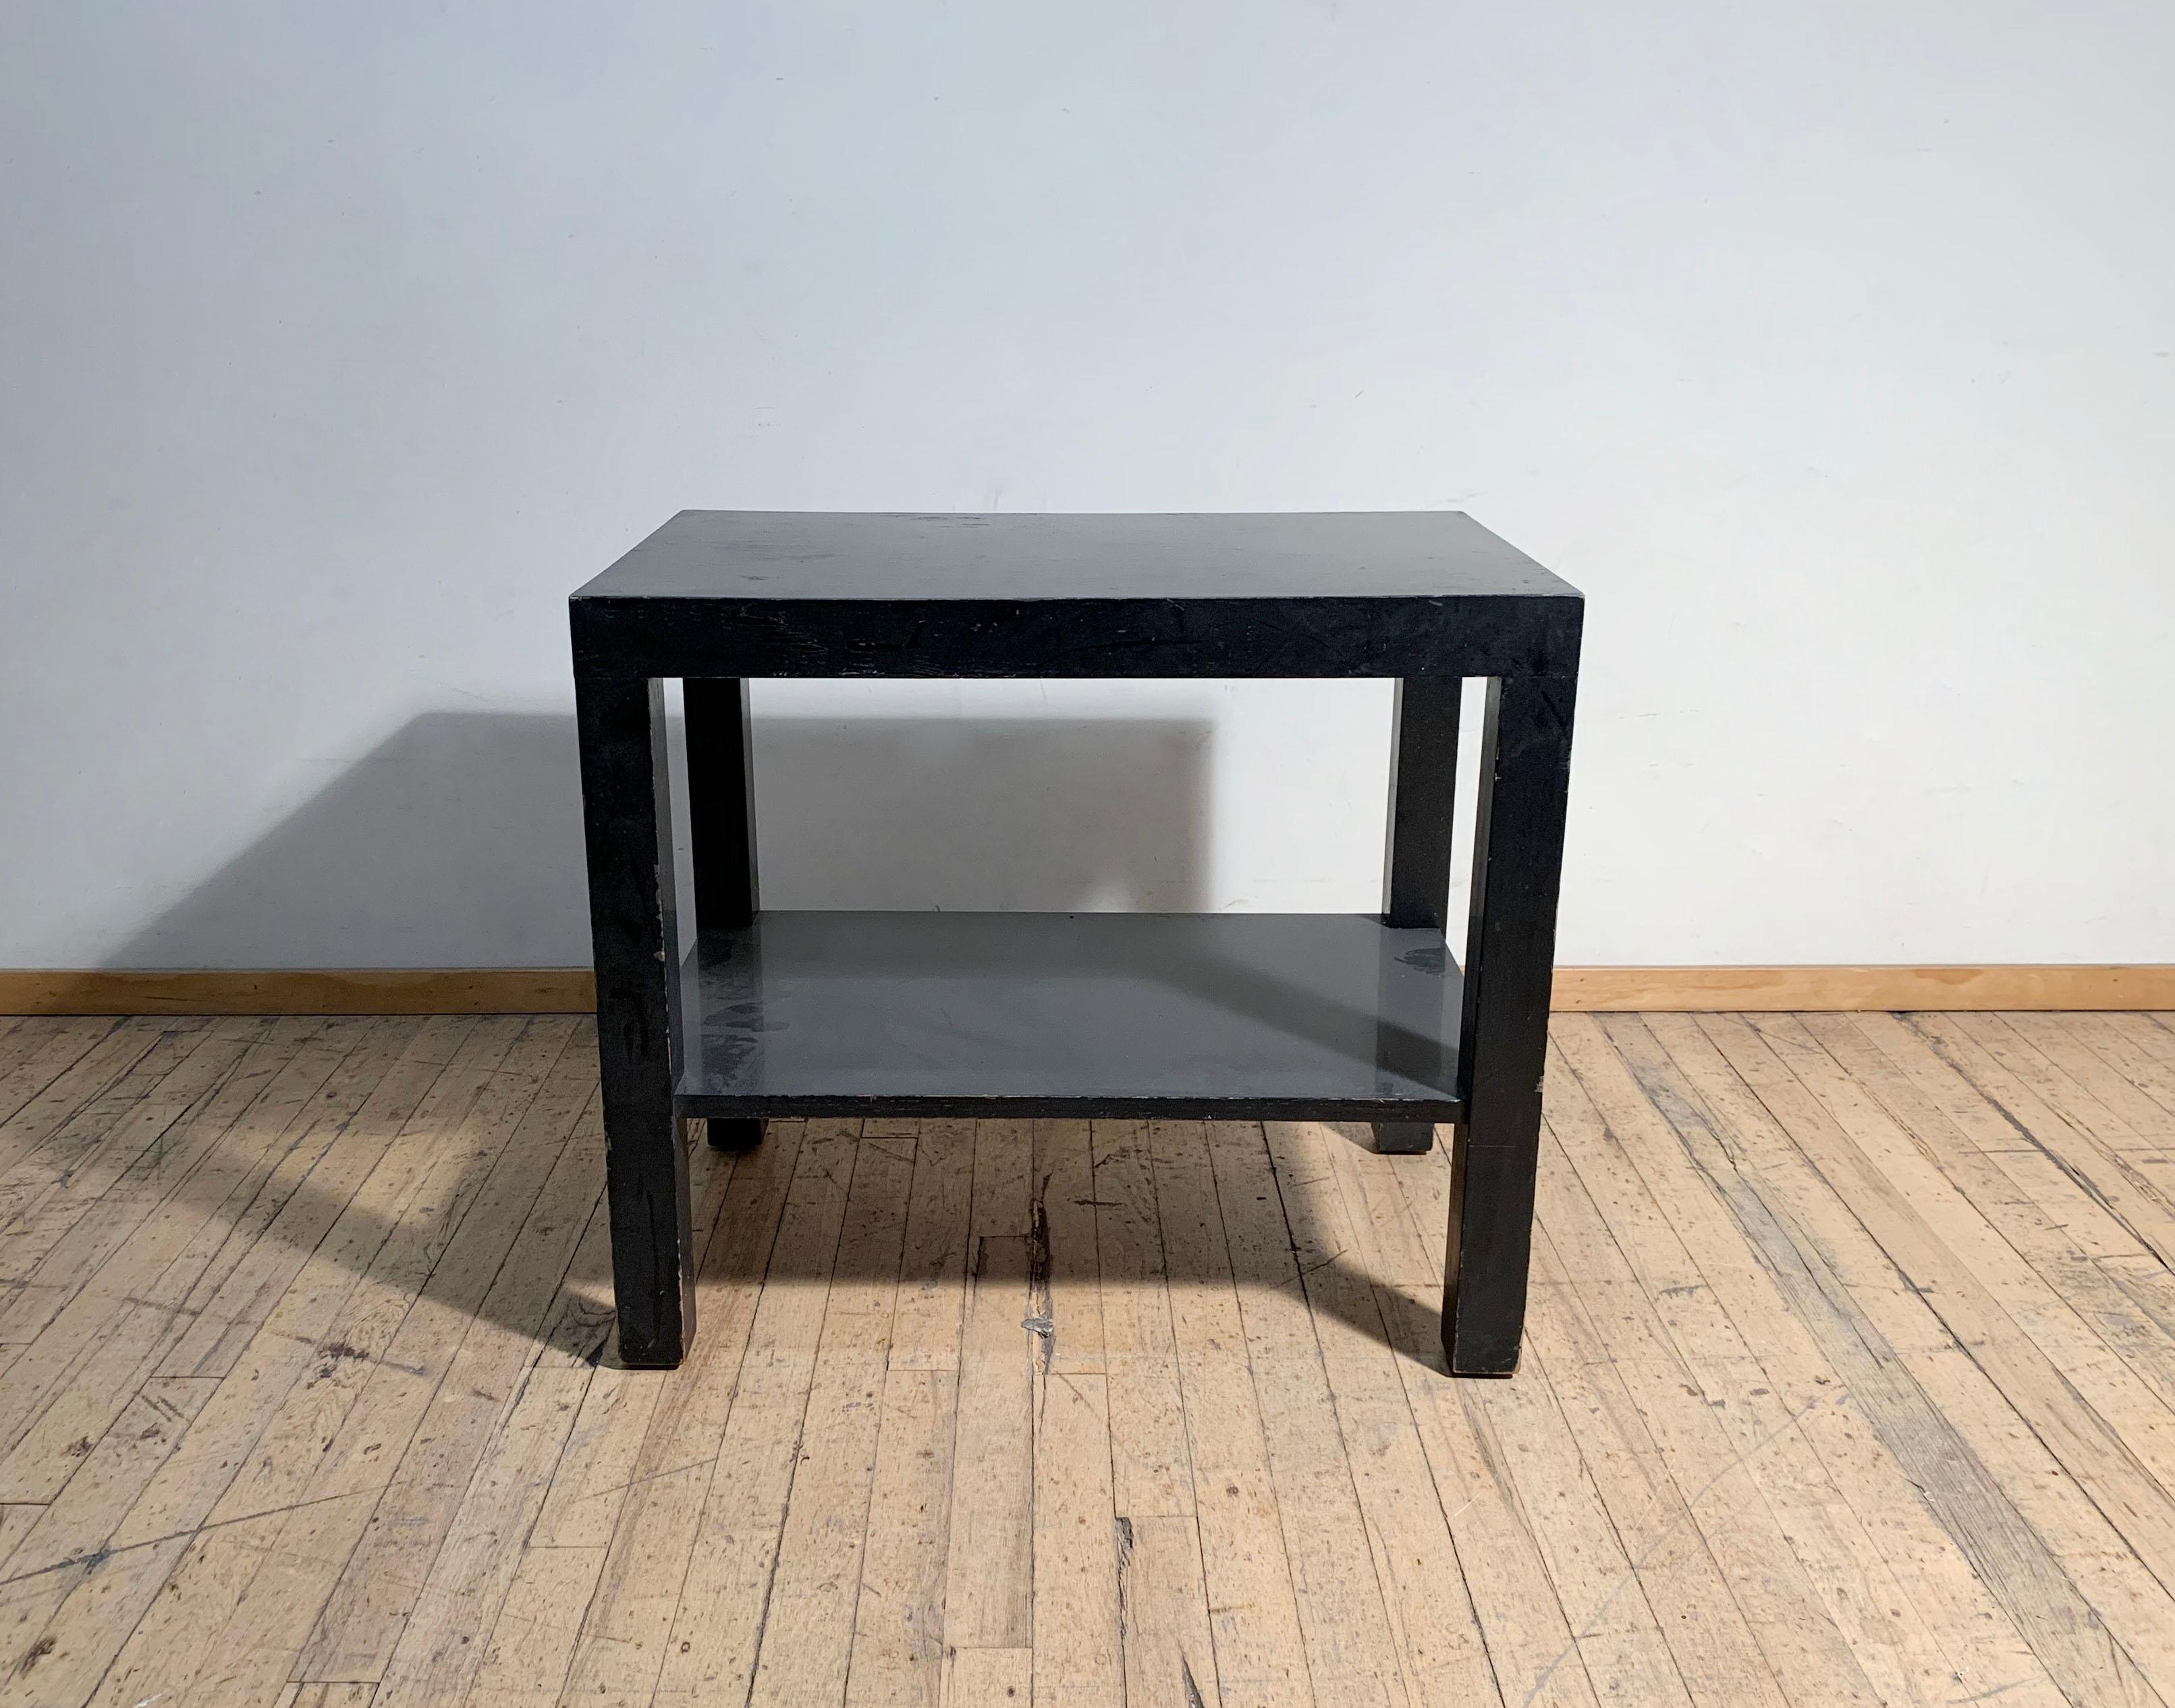 Pair of Modern Parsons Endtables / Night stands attributed to Robsjohn Gibbings. Original black finish dating to the mid 20th century. 
Tables are unmarked. Attributed to Robsjohn Gibbings for Widdicomb Modern. 
Structurally solid tables, however